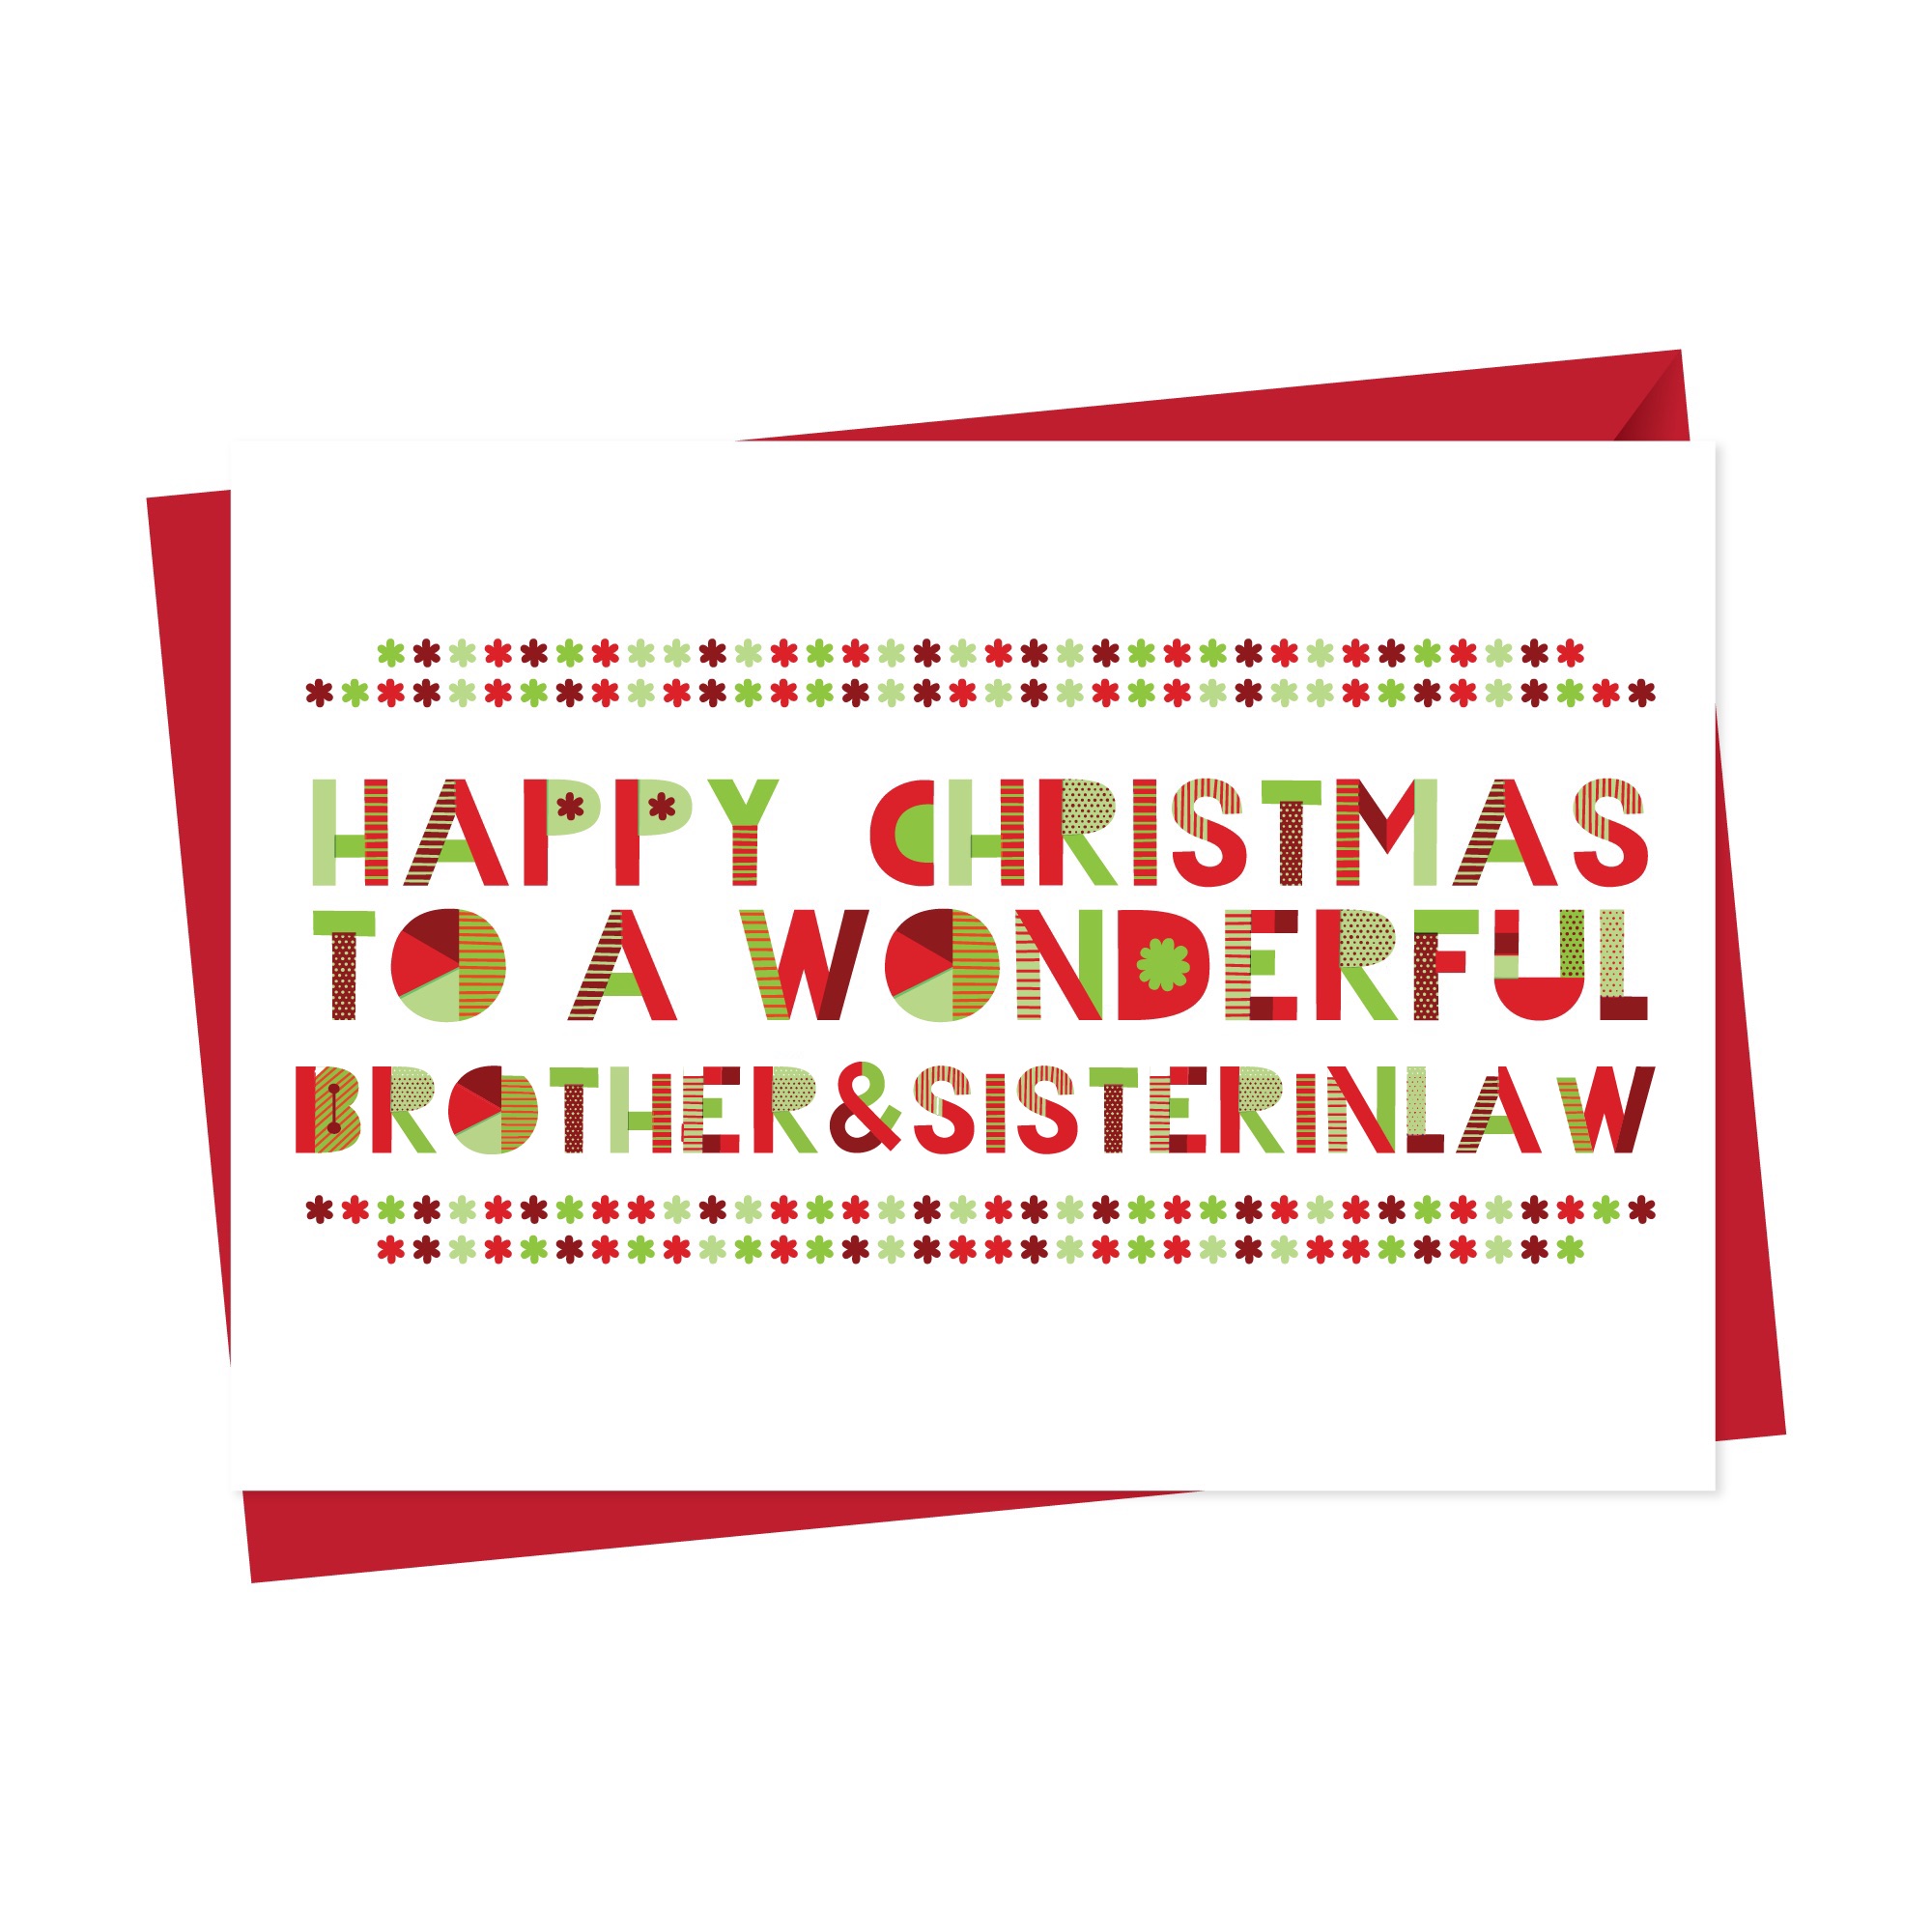 Wonderful Brother & Sister in Law Christmas Card